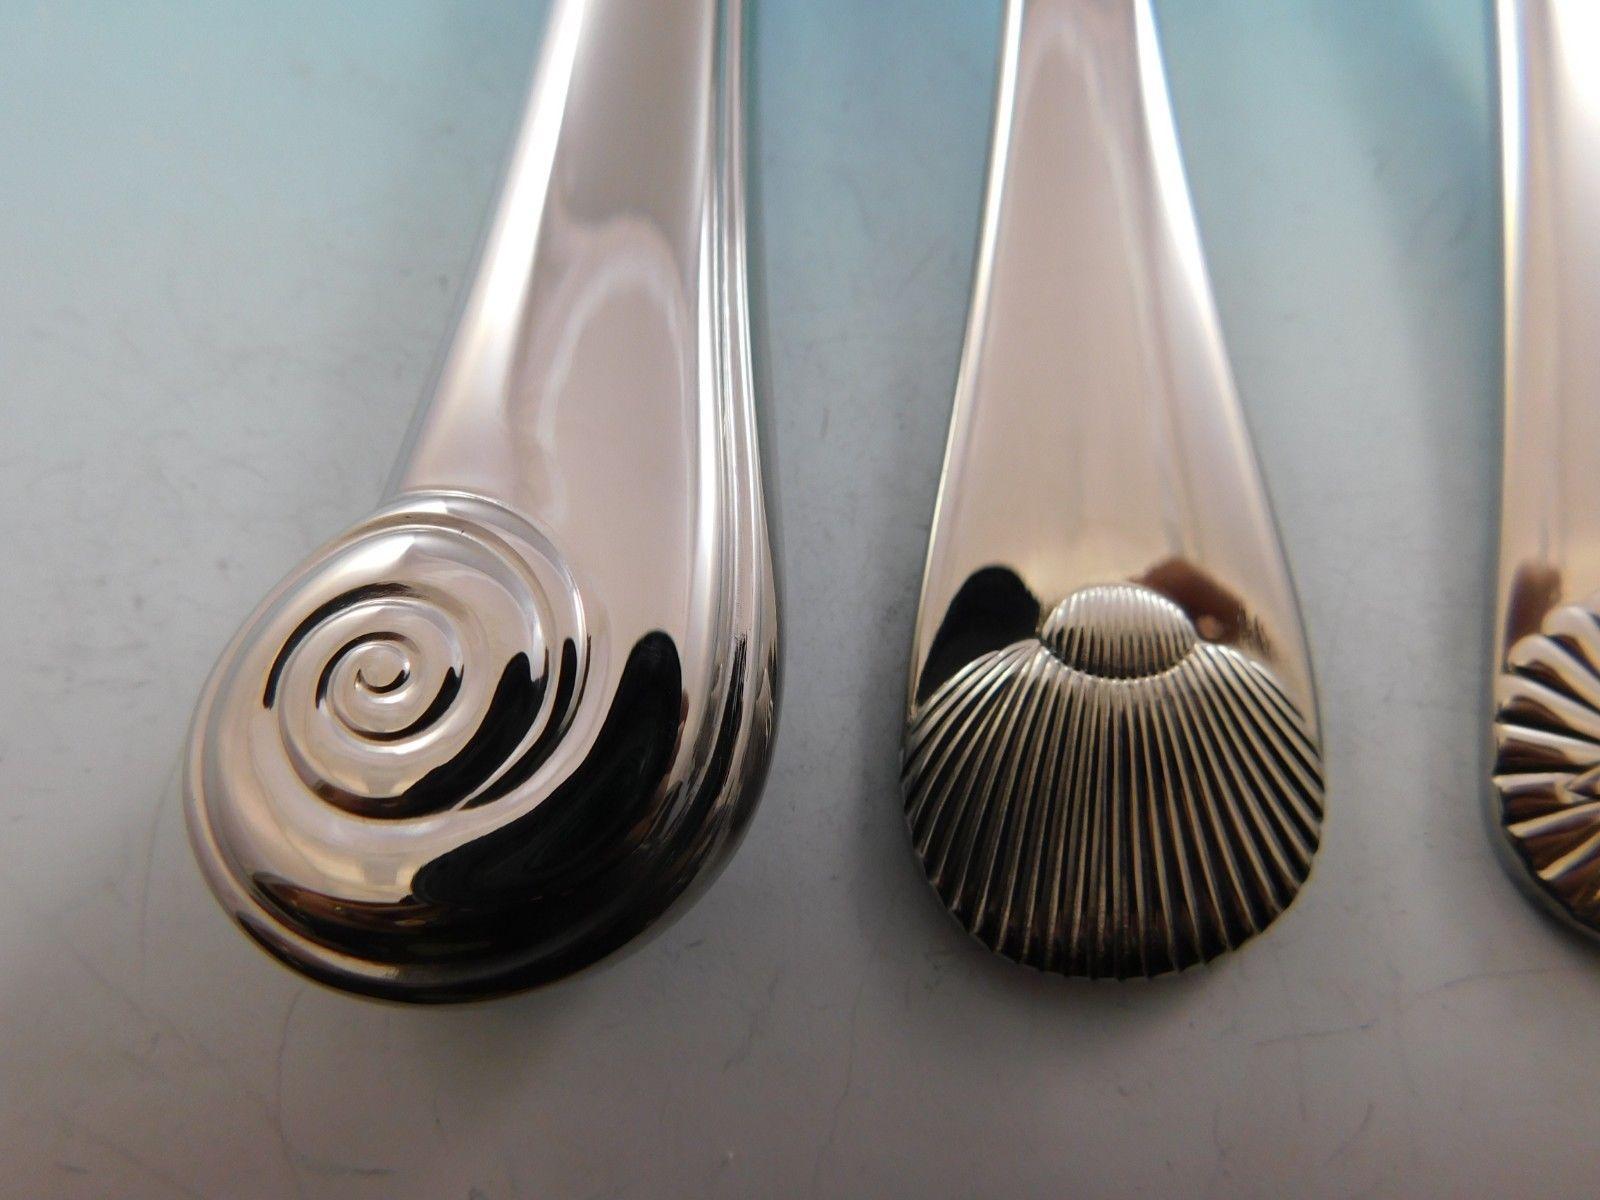 flatware with shell design